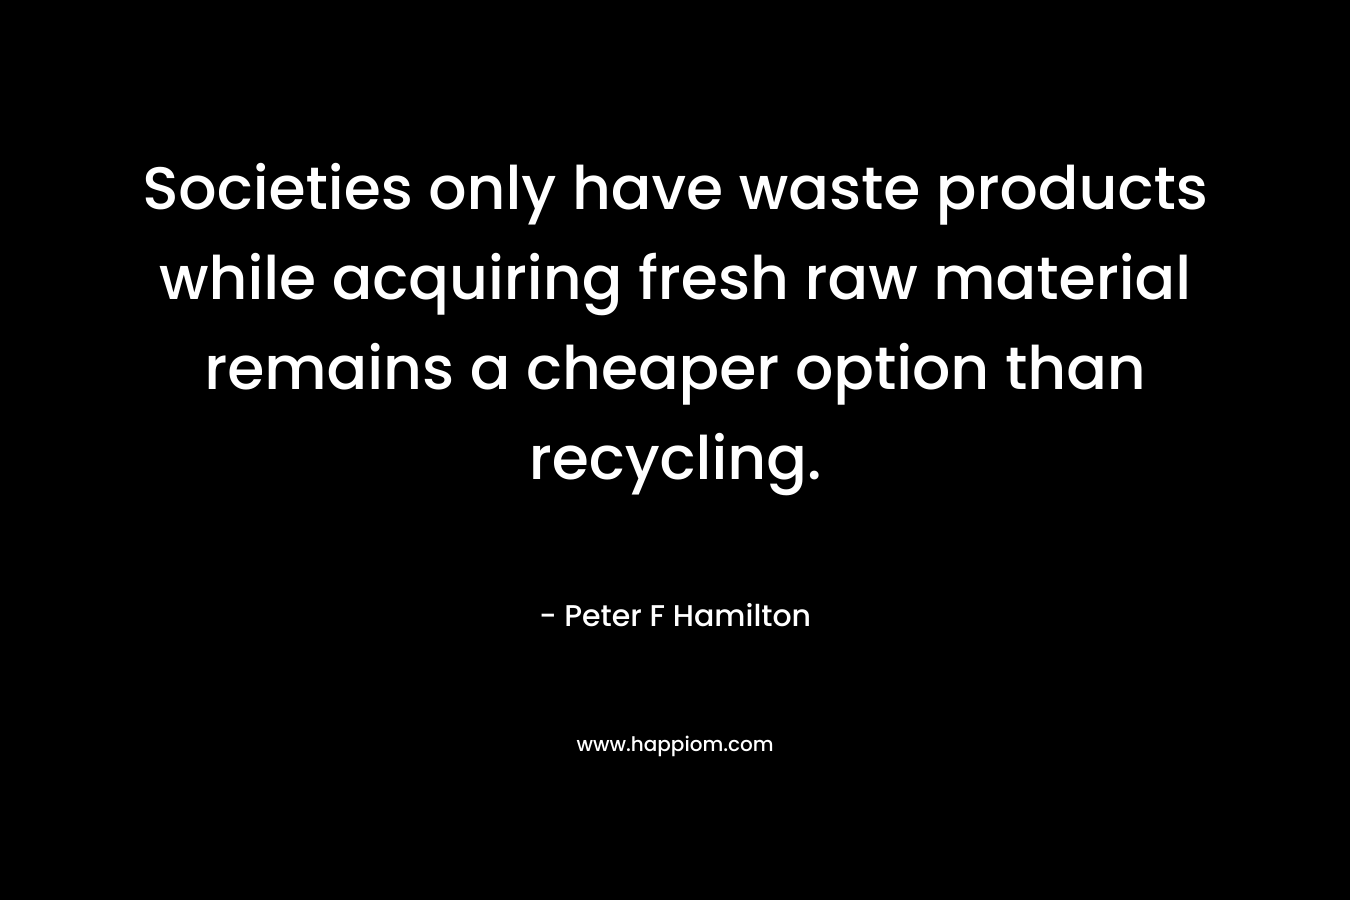 Societies only have waste products while acquiring fresh raw material remains a cheaper option than recycling.